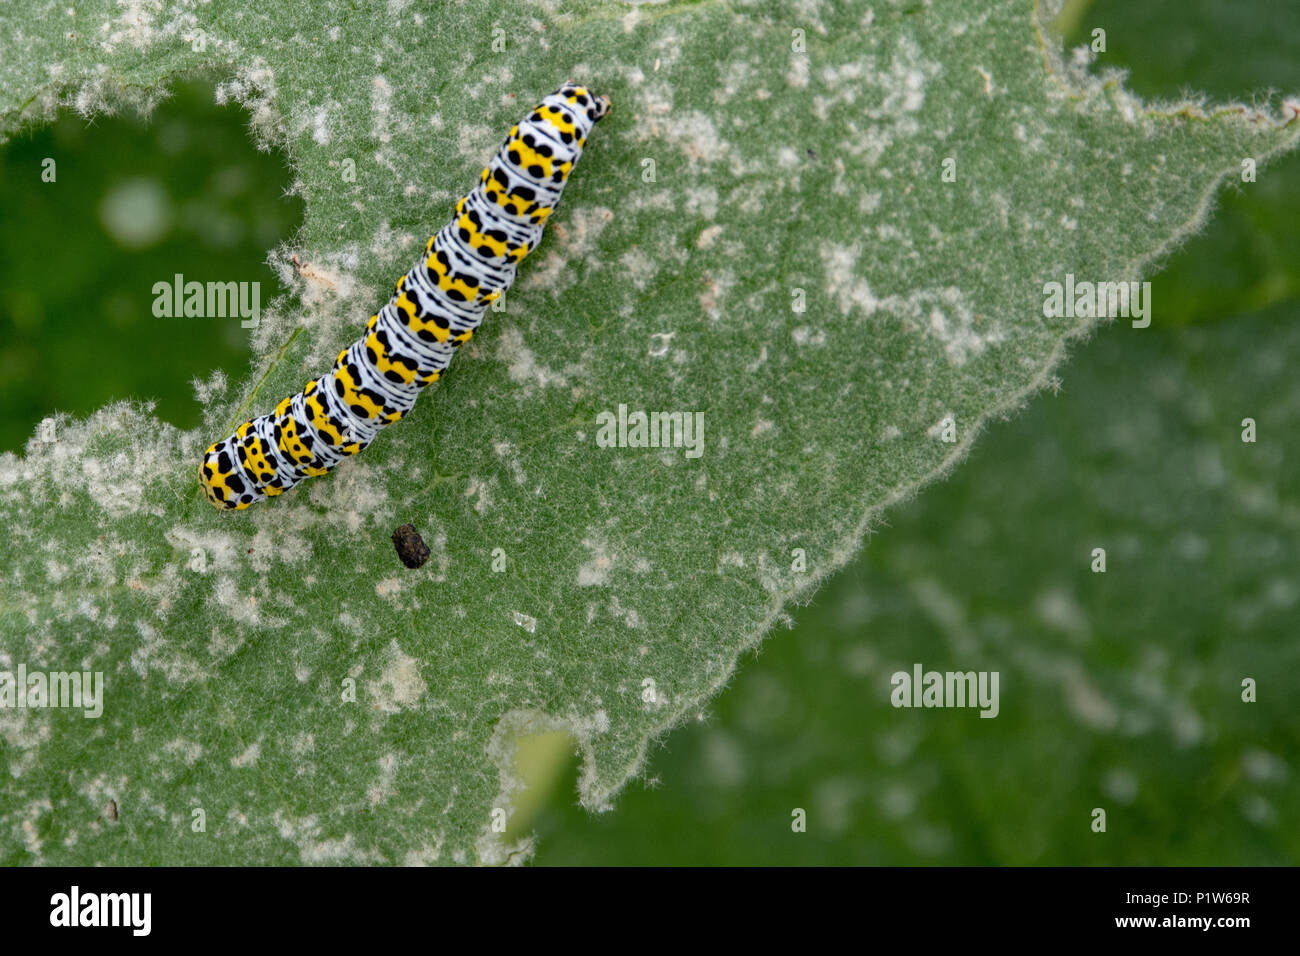 Colorful Black and Yellow Mullein Cucullia verbasci caterpillar feeding on green leaf Stock Photo